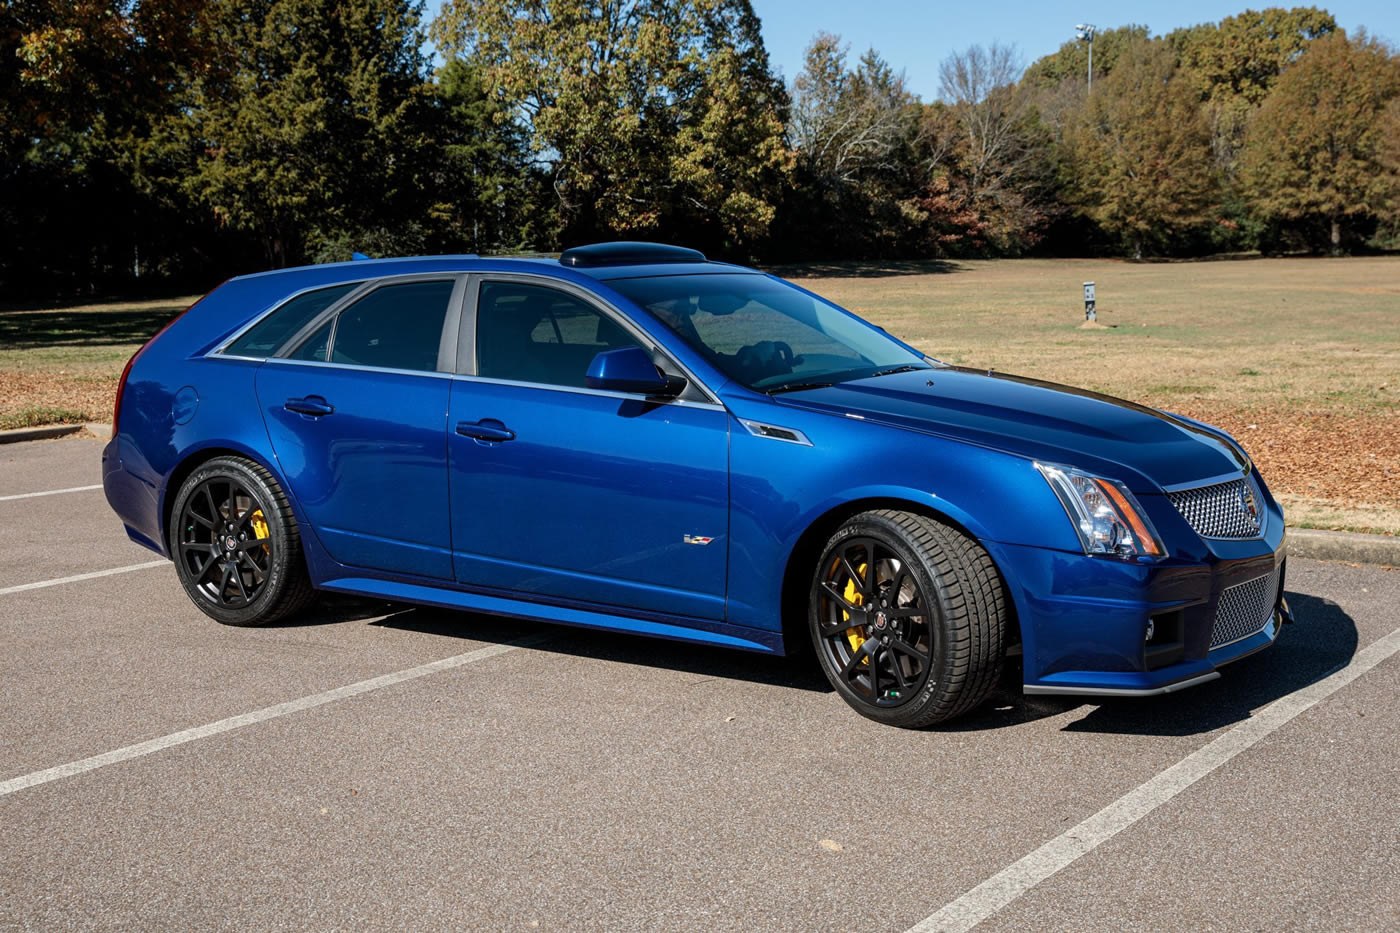 2012 Cadillac CTS-V Wagon in Opulent Blue